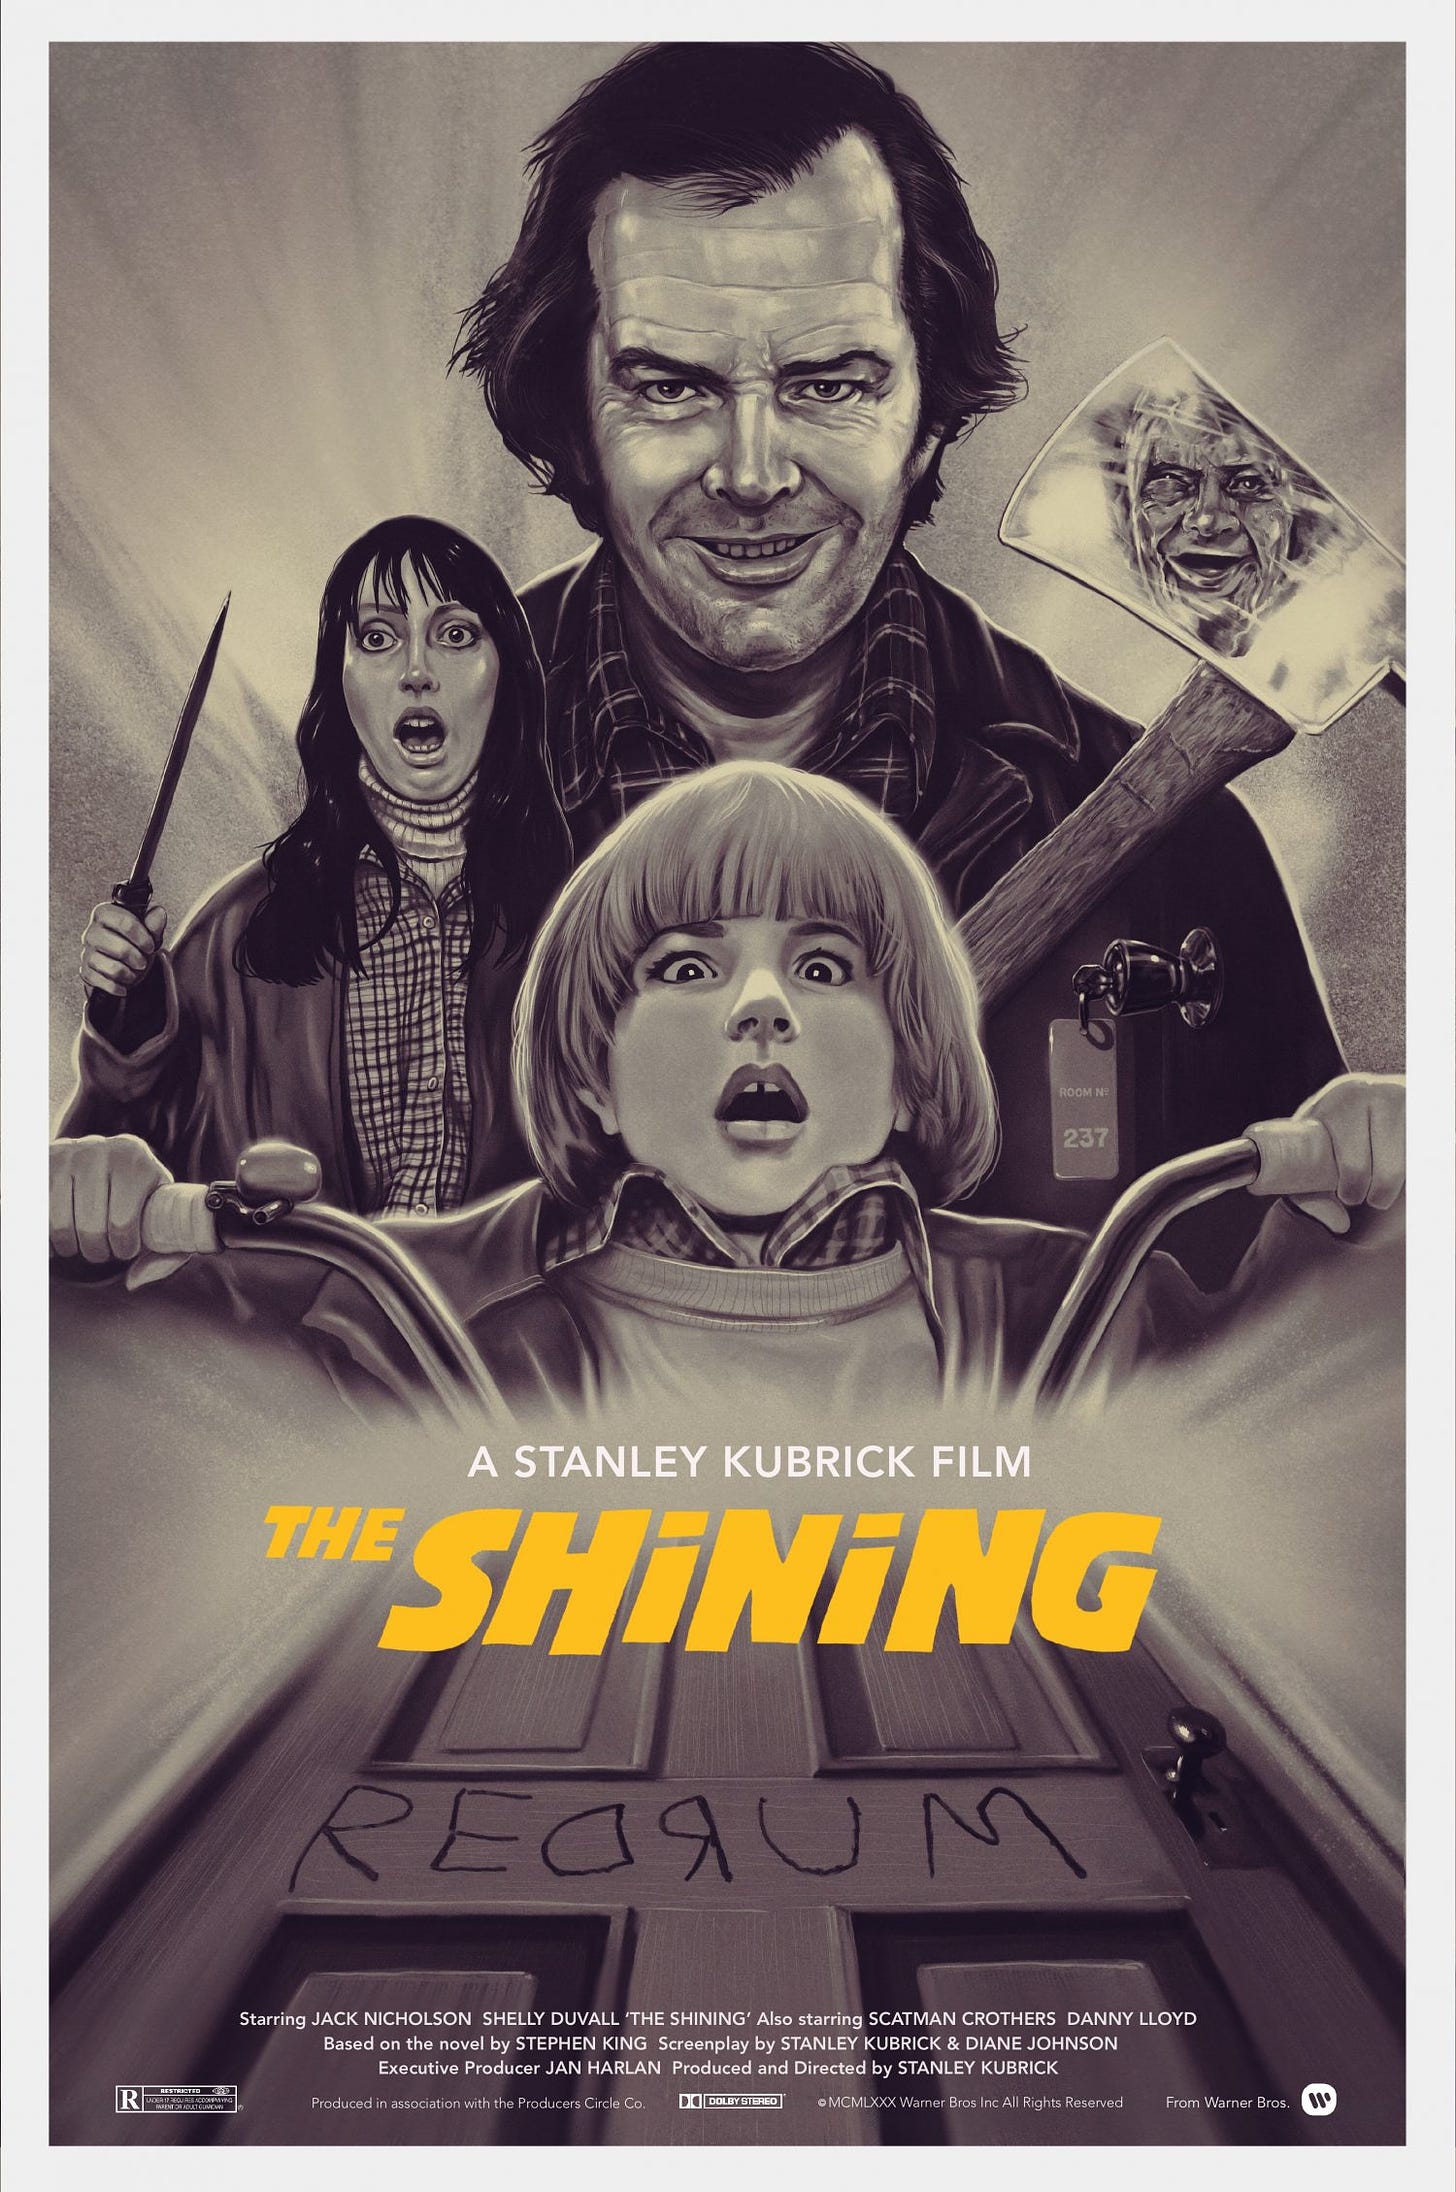 PosterSpy.com on Twitter: "The Shining (1980) poster uploaded by Nick  Charge View HQ: https://t.co/WNvUHQeP3H #TheShining #StanleyKubrick  #MoviePosters #PosterSpy https://t.co/3BiXwY1KmH" / Twitter